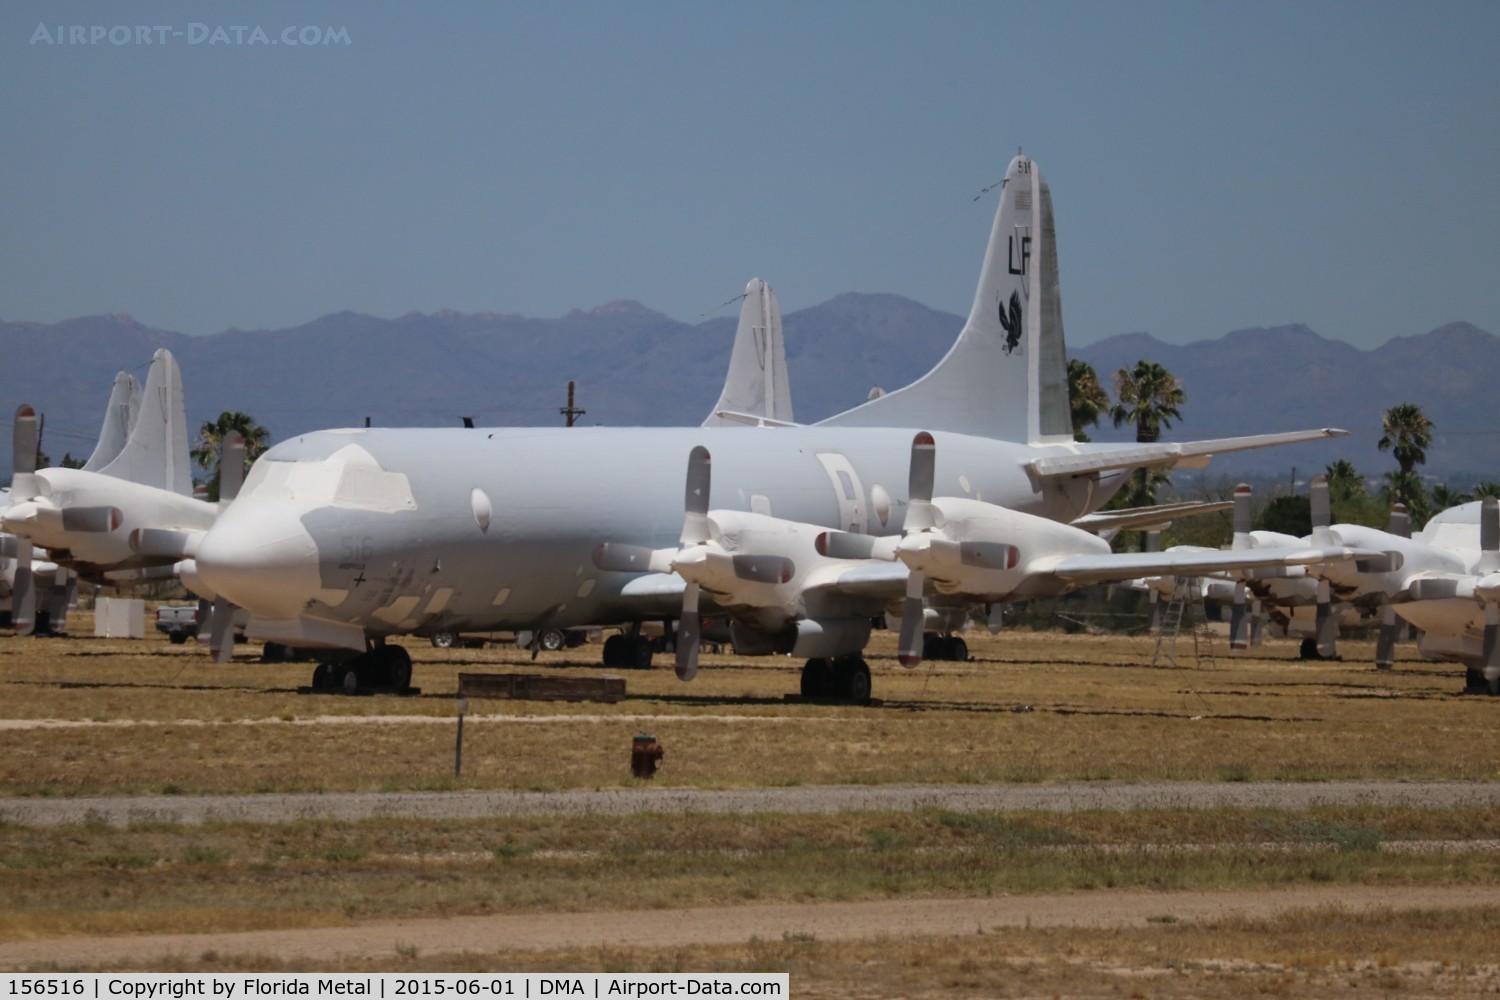 156516, Lockheed P-3C Orion C/N 285A-5510, P-3C Orion